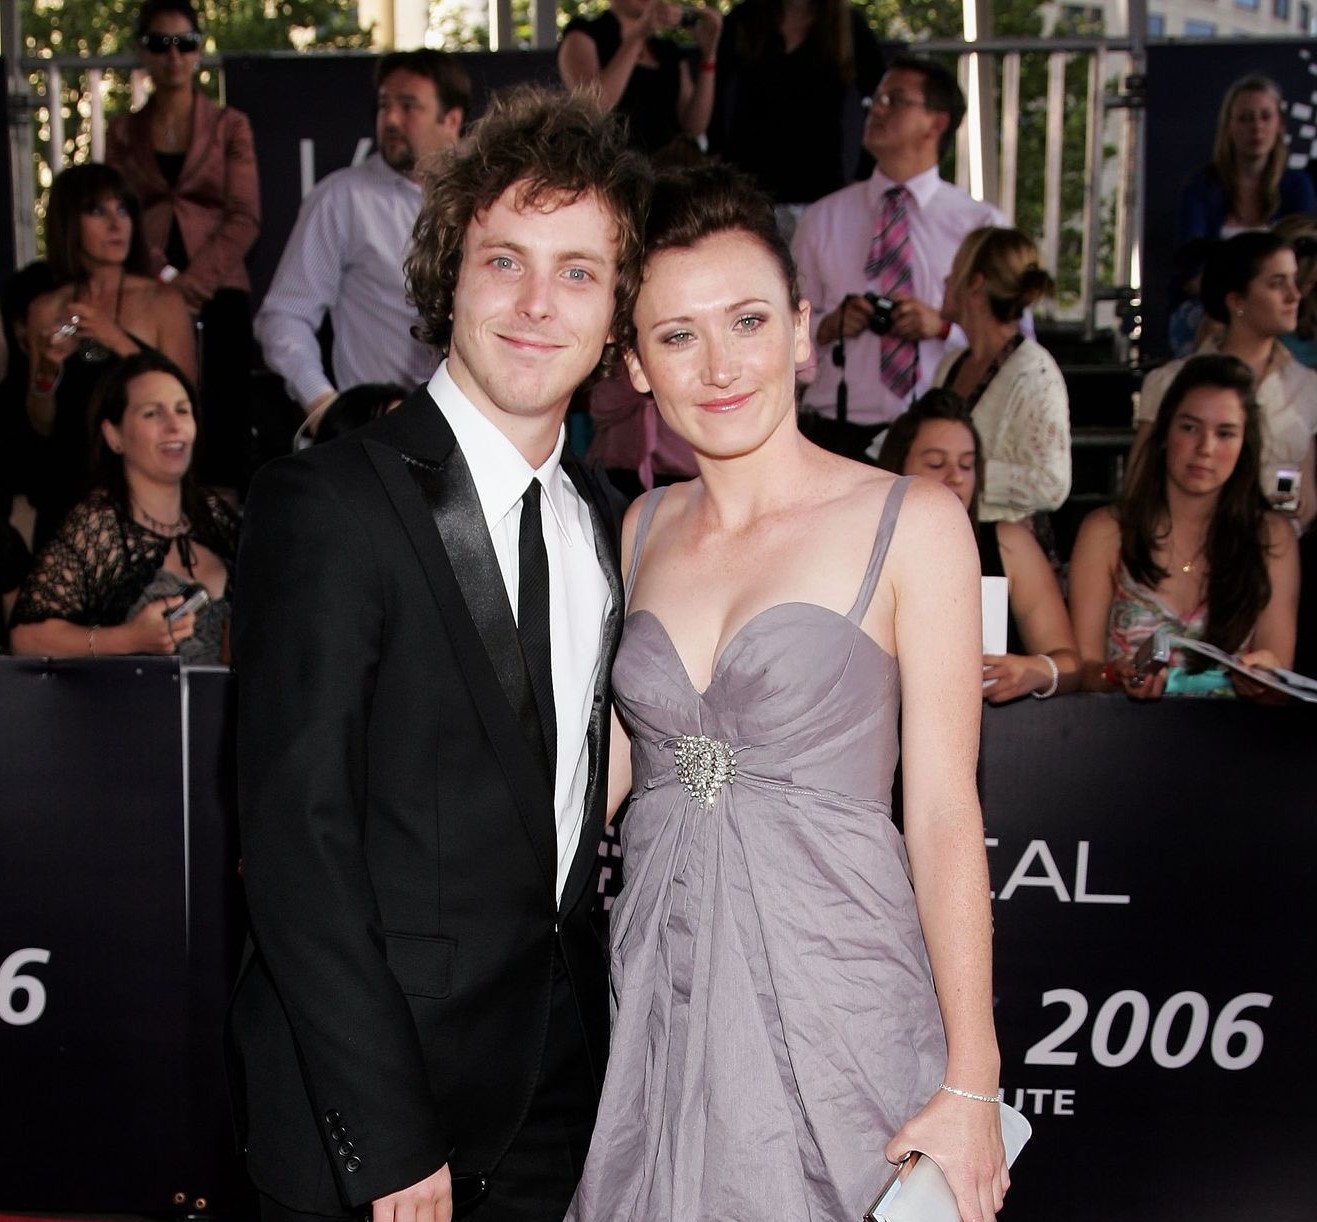 Australian actor, Budge with his girlfriend, Anna Houston at the L'Oreal Paris 2006 AFI Awards.